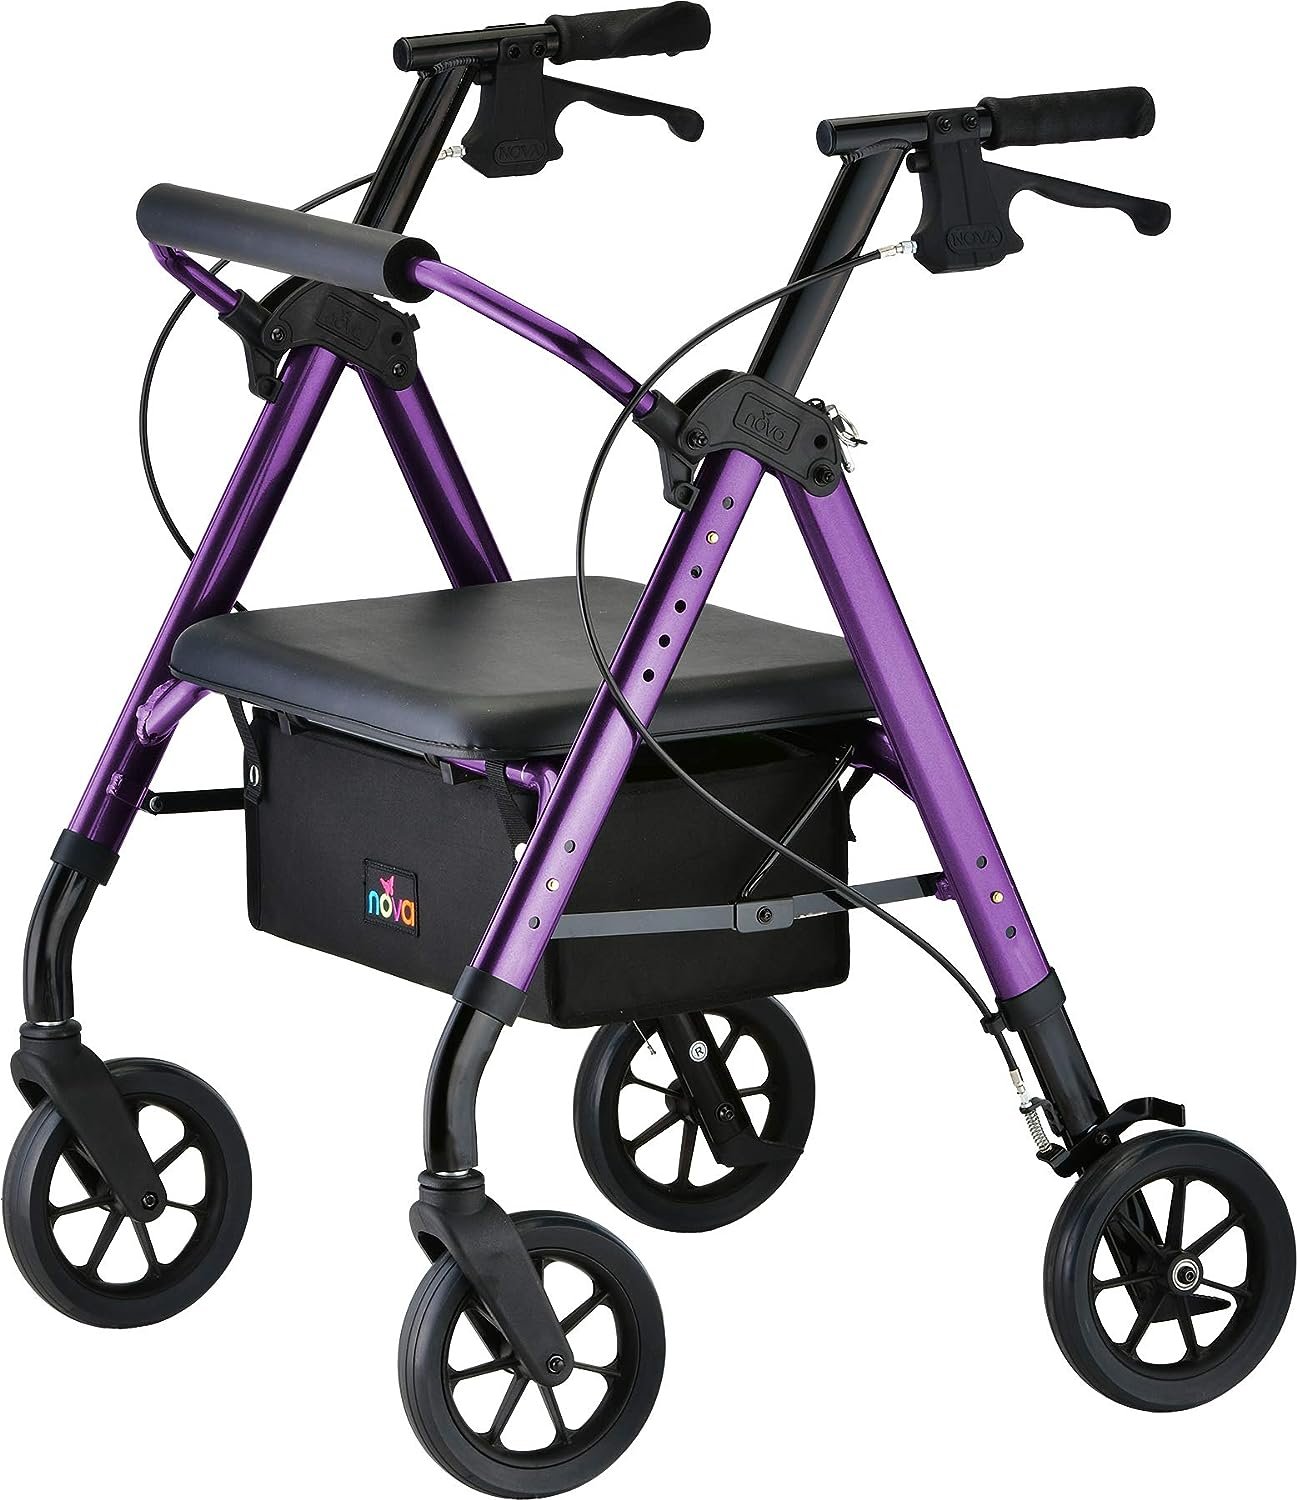 NOVA Medical Products Heavy Duty Bariatric Rollator Walker with Extra Wide  Padded Seat, Petite Approx User Height: 4'” –